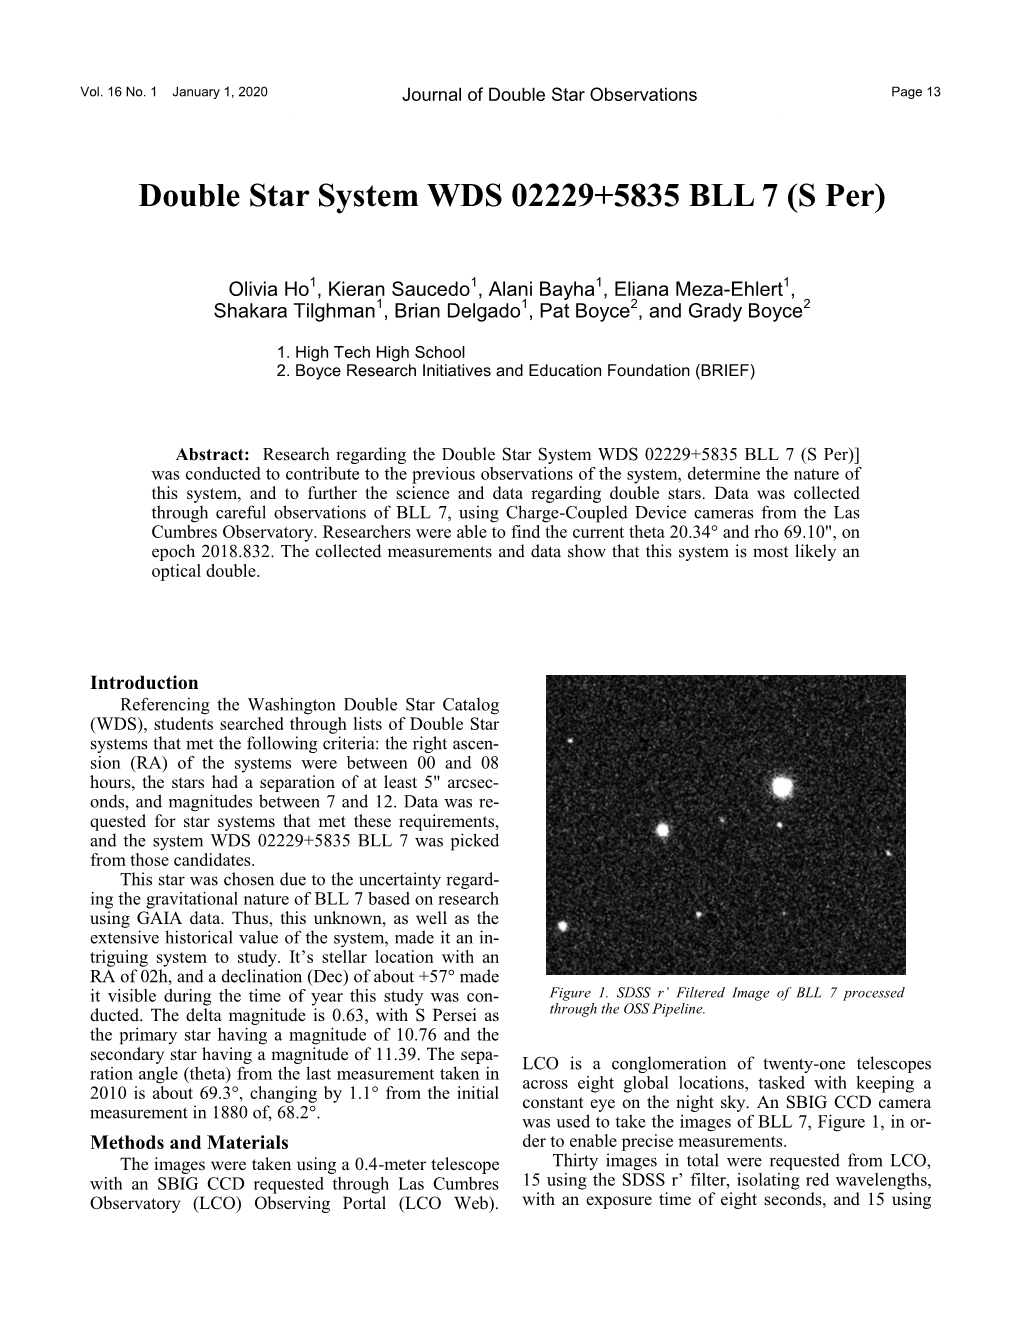 Double Star System WDS 02229+5835 BLL 7 (S Per)